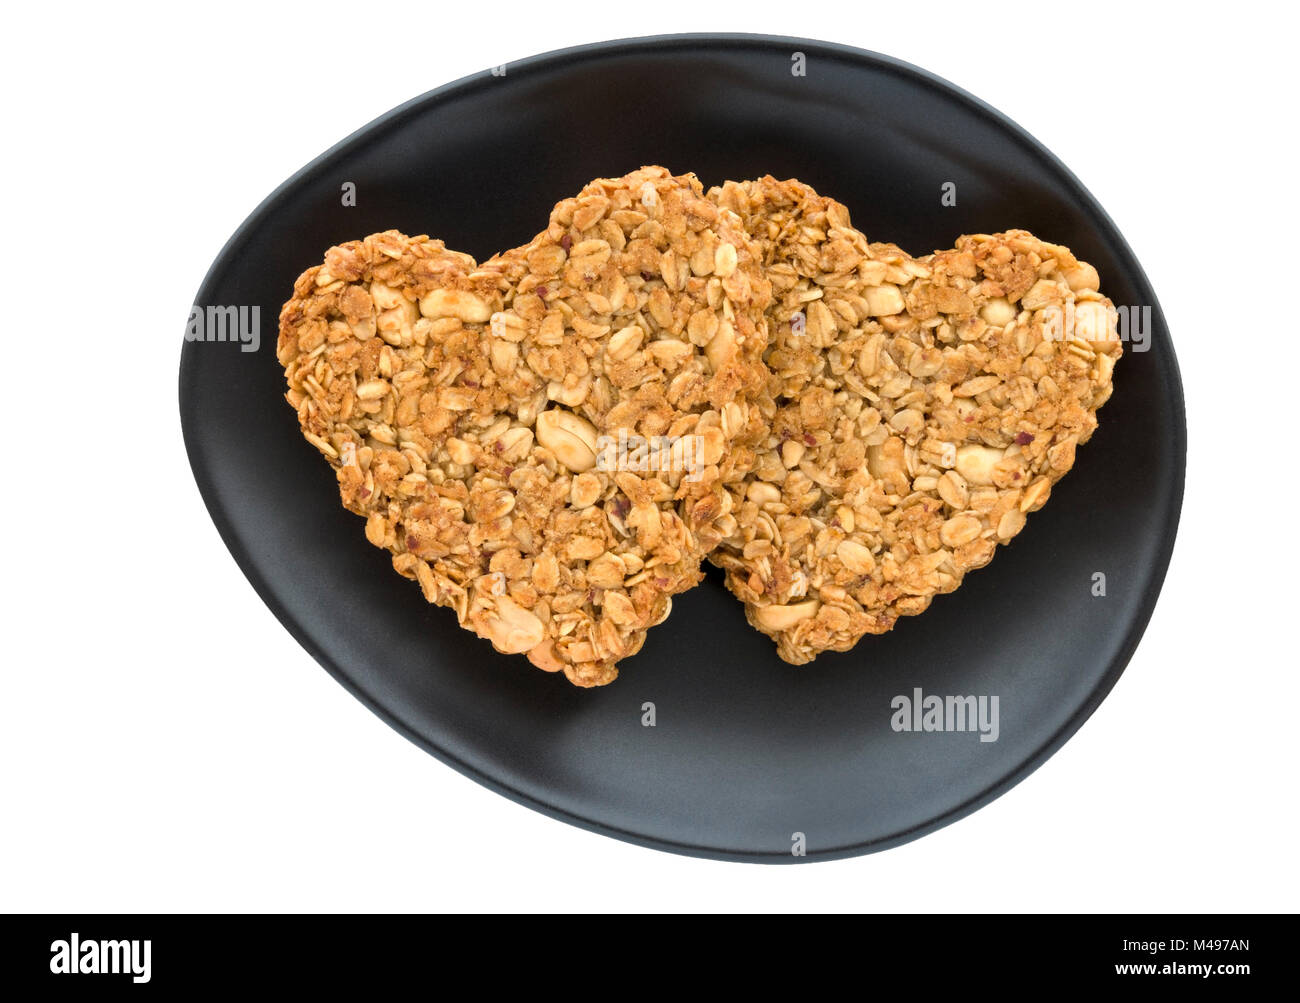 Two home-baked heart shaped peanut and oat flapjack biscuits made for Valentines day on oval black plate and white background. Stock Photo